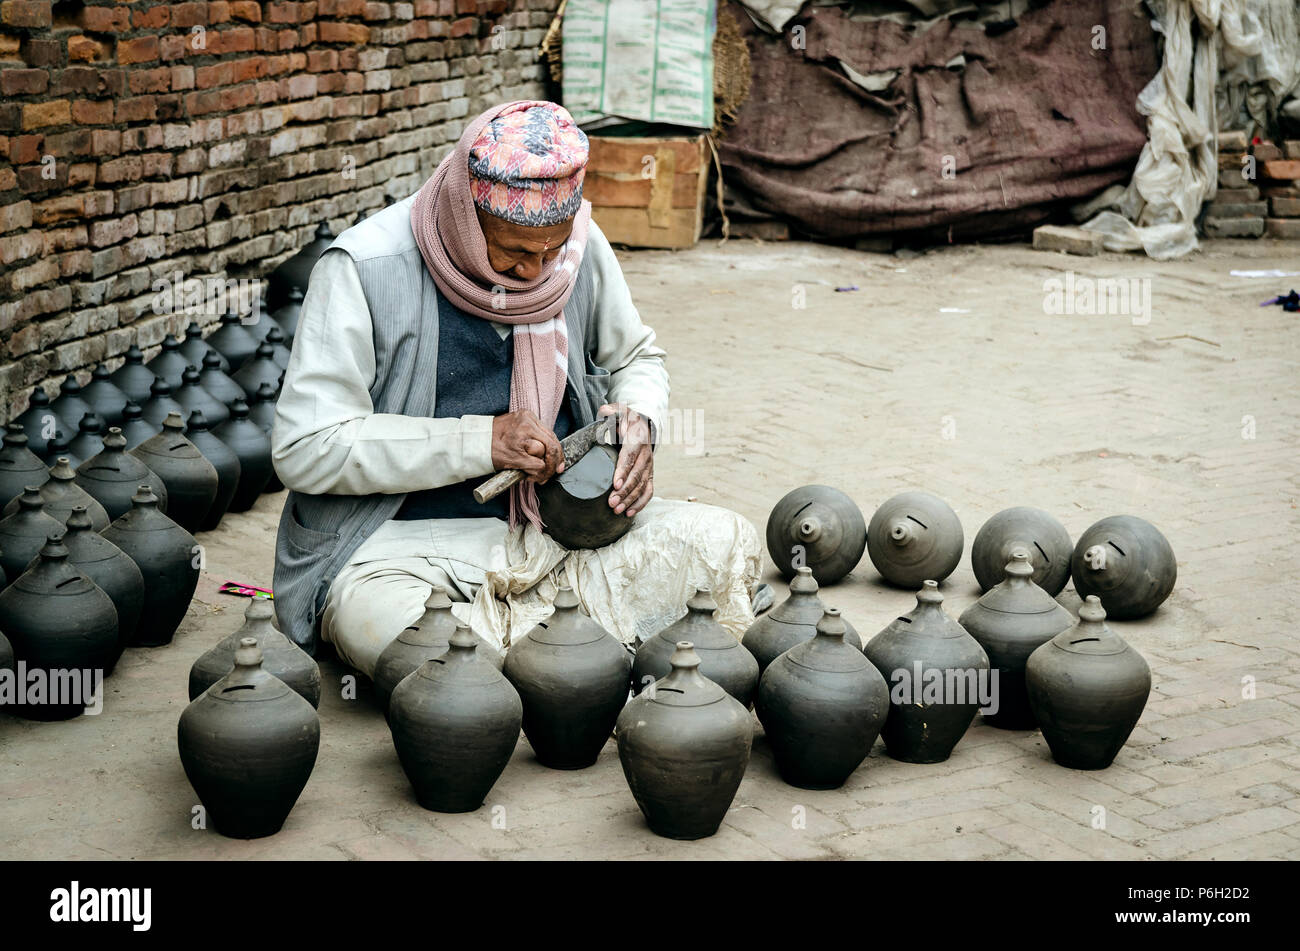 Nepalese Potter making clay pots, Potters Square, Bhaktapur, Nepal Stock Photo